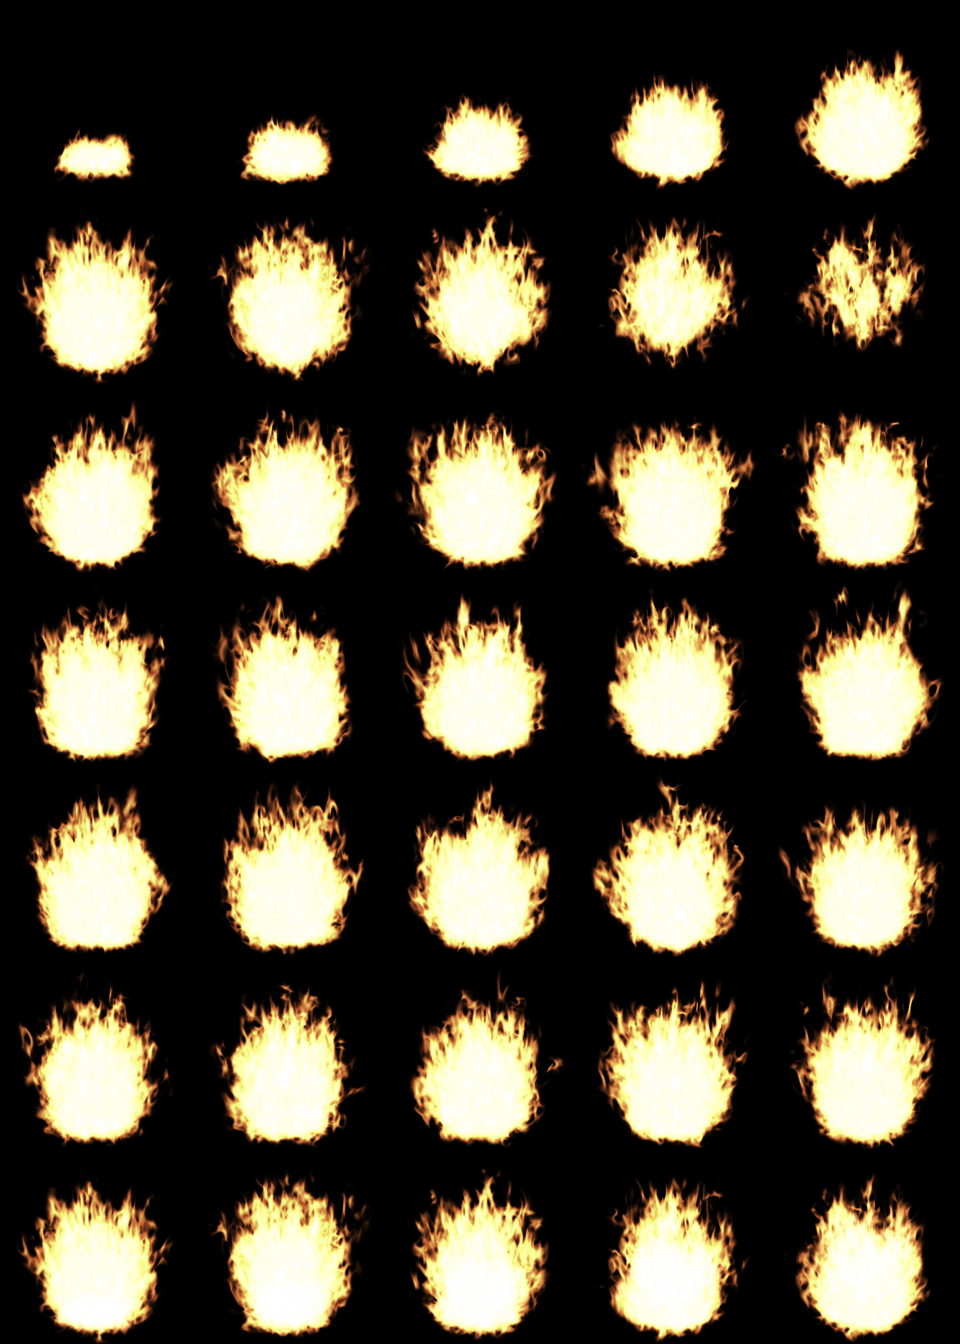 animation_fire007loop.png